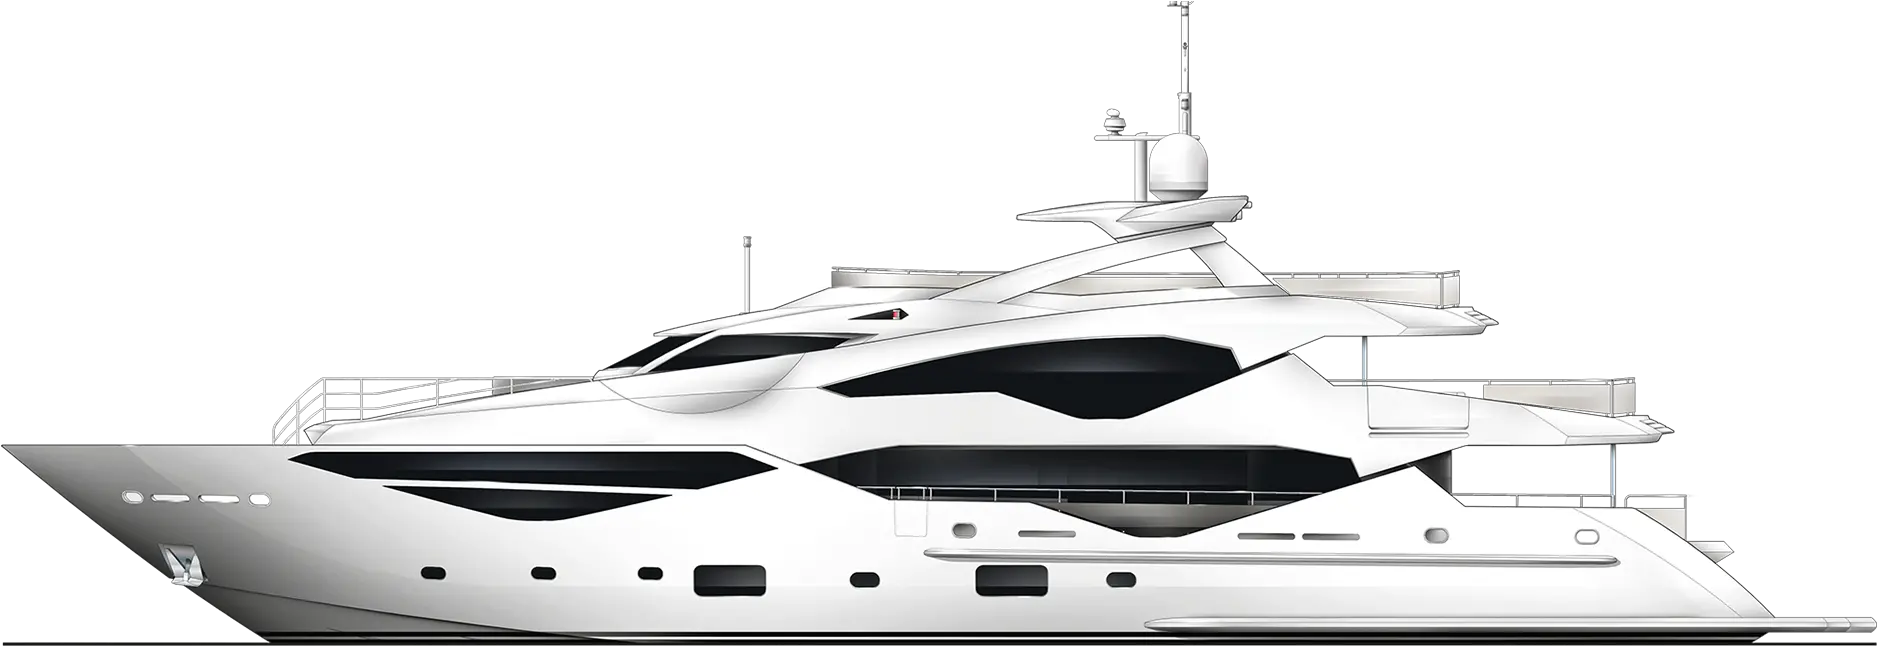 Yacht Png Illustration Luxury Yacht Transparent Cartoon Yacht Png Yacht Png